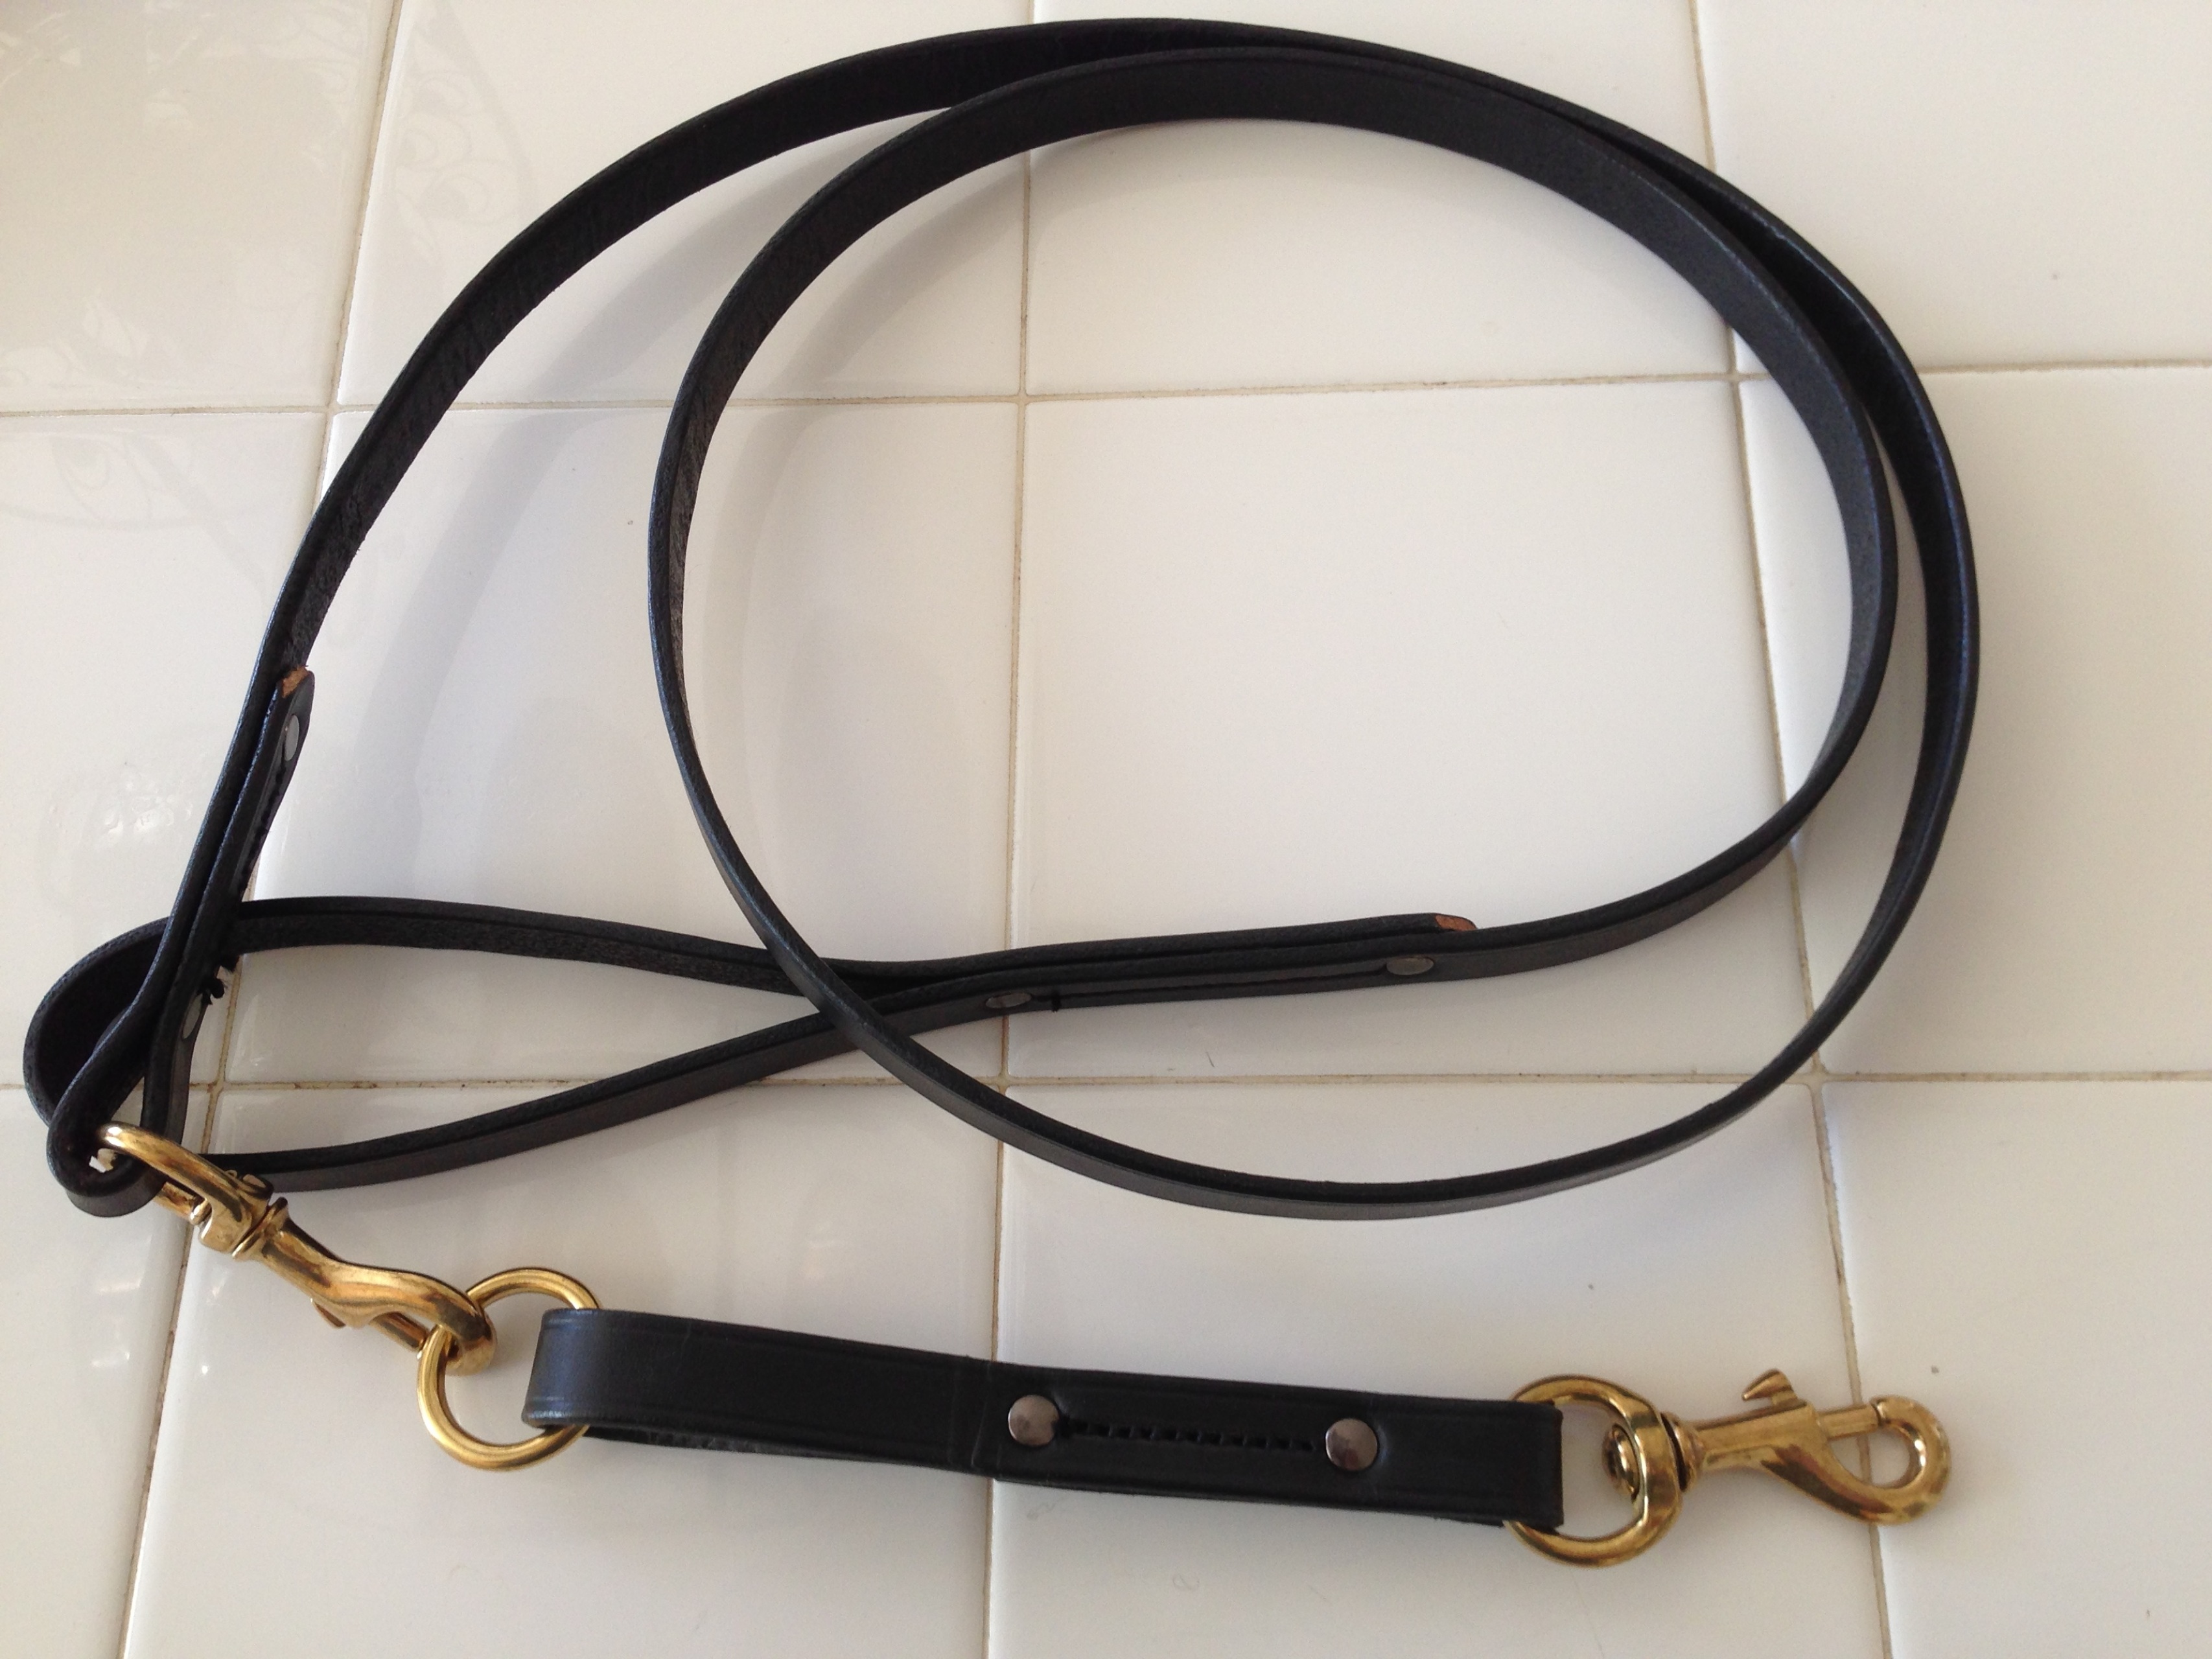 6 foot leather leashes with the pull tab